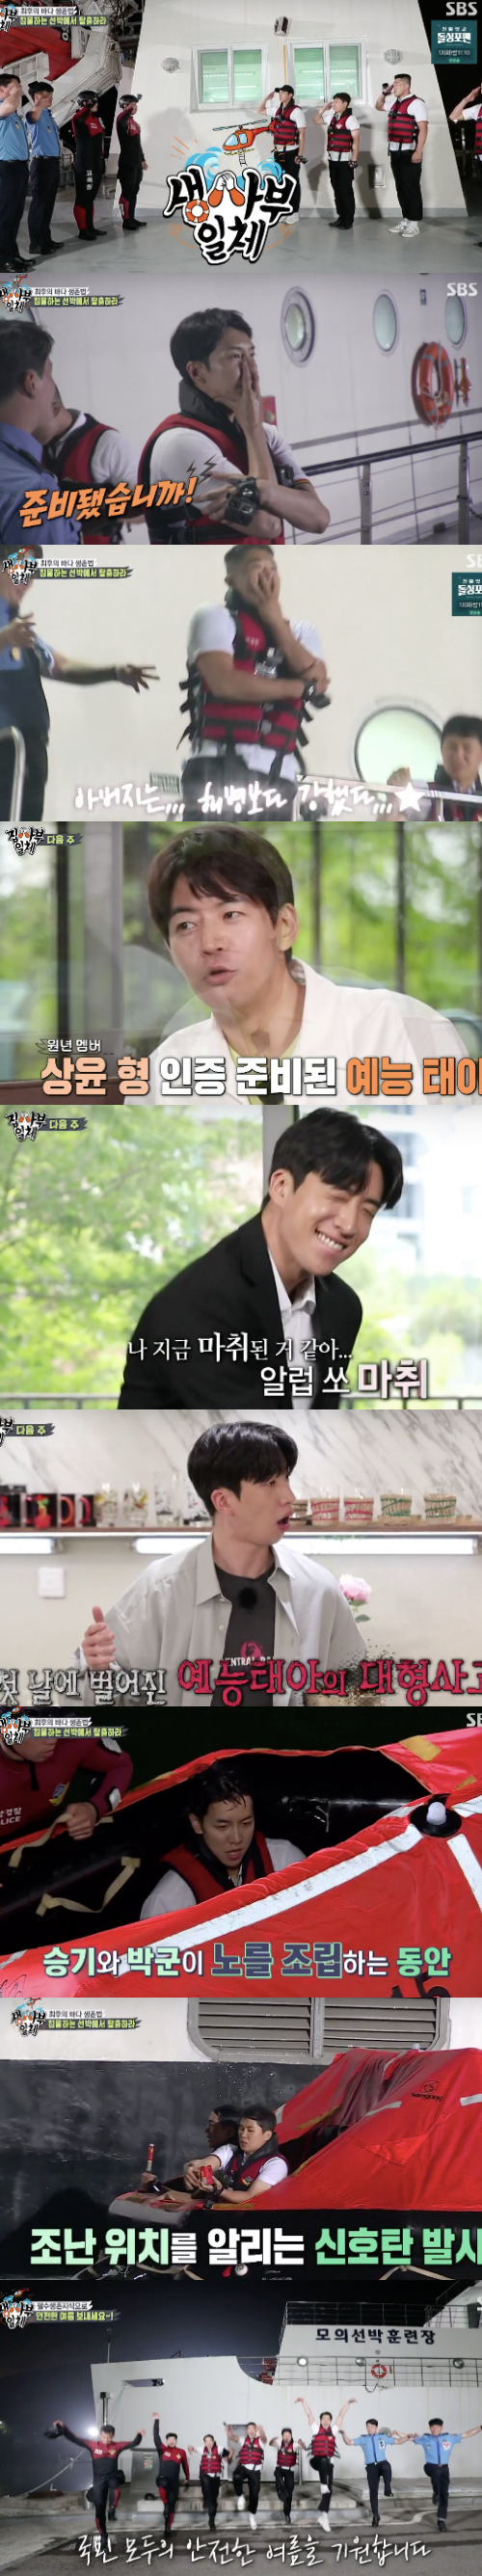 In All The Butlers, Lee Seung-gi also acknowledged that this Kwangsoo-like Yoo-bin announced his departure as the new youngest, and from the first appearance, he predicted a large sarrar.A special summer vacation was broadcast on SBS entertainment All The Butlers on the 4th.I started training to send the vacation safely this summer. First, after the personal training, I explained how to get a safety training to save my opponent and to confront Algae.When the members said that Algae could be dangerous without waves, the members decided to feel Algae directly and were surprised to see Algae shaking like crazy.Then, from Kim Dong-Hyun, Lee Seung-gi jumped directly into the water.Lee Seung-gi could go farther than Kim Dong-Hyun but was blocked by Algae.In the end, they declared their abandonment, shouting, It is not easy, retreat, and Park Gun quickly got it, shouting Icemaker discovery, and went forward without hesitation, showing off his ability to swim from the privileged.Park Gun, who read Algaes direction, made a way in the opposite direction of Baro, and Lee Seung-gi admired it as a privileged warrior.Park Gun did not face Baro and crossed the road diagonally, but eventually gave up in front of the nose in a huge Algae.The reason was that Algae was so strong in the water that he did not go forward, and Lee Seung-gi, who sympathized with it, sat down, saying, I did not know Algae was so scary, even dizzy.The Korea Coast Guard demonstrated the rescue swimming by explaining that it should save others in this extreme Algae.The members were impressed by the sudden rescue of the drowned, saying, It is wonderful, it is creepy, it is wonderful. It was only 52 seconds.Now the members are the Top Model, and in the event of a drowning accident, the Golden Time is only four minutes, so they have to approach the rescuer within one minute and get out of the water within two minutes.Lee Seung-gi and Yang Se-hyeong, Park Gun and Kim Dong-Hyun teamed up and started training to see if they could rescue them within Golden Time.From Park Gun, it was Top Model, perfecting with the rescue swimming manual and successfully rescued in just 1 minute 37 seconds.However, Lee Seung-gi was unable to move forward because the life tube was twisted in his arm, and eventually he missed the golden time because he was untangled.It was later rescued with the help of the Korea Coast Guard.All of them were exhausted from their hardship training. But they were not finished.Next, we decided to start search and rescue training at the trained Ship simulator that reproduced the inside of Ship.Once a passenger ship crash, it will be a major accident, and an accident will require the necessary Earth 2 knowledge to come without any trouble, said the Korea Coast Guard.If you get water up to your neck, you have to escape from the completely locked situation, you have to set the escape method and standard, he said. If you see light, you can escape in that direction, if you are in a hurry, you can turn to the same place, he said.Yang Se-hyeong and Park Gun entered Ship first.Yang Se-hyeong said, It is scary to come to a closed space in an oppressive space, and Park Gun was nervous that he could not breathe even if he was still.It was a narrower ship than I thought.In the meantime, the simulator descended at a rapid rate and was completely flooded.Lee Seung-gi said, How scary is in there? Unlike the tense and bright training ground, it is actually a blackout situation with both inside and outside.Park Gun succeeded in escaping first, but Yang Se-hyeong, who was nervous with the fear of closure, was embarrassed by The Net filled in front of his eyes, but succeeded in overcoming the fear and escaping.When you go inside, youre afraid of closing, youre scared of being trapped, Yang Se-hyeong said. Park Gun also agreed that fear is not a joke.Next up was Kim Dong-Hyun and Lee Seung-gi, the Top Model.To Kim Dong-Hyun, who panicked in Ship, the Korea Coast Guard began training by saying, Stay down, and the two men cleared up and Top Model.Kim Dong-Hyun first stopped at The Net, which kept blinding the view, and then nervously said, I suddenly feel afraid. Then, I will go to the lurking and succeeded in Earth 2 in the water to avoid obstacles.This is the fourth second secret, SBS, and Earth 2.I think this training will help us stay calm even if the crisis is in place, said the Korea Coast Guard, and in fact, its hard to find a large ship, and I hope you can check it because there are emergency evacuations all over the ship.The last gate remains for Earth 2, to learn how to do Earth 2 on a real boat, the final training to escape from a sleeper Ship.First the emergency set signal rang and informed the situation that the Ship had to leave.The Korea Coast Guard explained the life rafts: We need to check emergency guidance for a safe trip, the members said, once again alerted.The Korean Coast Guard continued that it should escape from the sinking Ship, saying, If you do not play on this ship, it is over, and if you have confidence that you can do it, you can succeed in Earth 2.With no training now in action, Park Gun was the first to take the lead; Park Gun, who was in a position of weakness, jumped from a dizzying height.The Silgen Book was also a brilliant steel privileger, Park Gun. Next, Lee Seung-gi, a former privileged fighter, succeeded in jumping down to the pilot assistant.This moved the privileged duo Park Gun and Lee Seung-gi to Baro up the flipped raft - but its not easy as they lose their balance.Again, shouting the fight, the two re-Top Models, and finally succeeded in setting up a raft boat.Kim Dong-Hyun and Yang Se-hyeong also managed to escape the sinking Ship, now having to take a boat out of the Ship.While Lee Seung-gi and Park Gun assembled the paddock, Kim Dong-Hyun and Yang Se-hyeong fired a signal from the sleeper Ship to signal the distress location.Thanks to this, we all succeeded in securing a safe distance by joining forces.At the end of the broadcast, the members said, It is a really beneficial training. The members all ended the training by praying for a safe summer vacation for all the people.On the other hand, in the trailer, actor Yoo Soo-bin, who announced his departure as the new youngest, was introduced.In particular, Lee Seung-gi looked at Yoo Soo-bin, similar to the appearance of Kwangsoo, and said, I will go out of Kwangsoo type Running Man and say All The Butlers. In the expectation of everyone, Yoo Soo-bin predicted a major accident from the first day.Capture All The Butlers Broadcast Screen